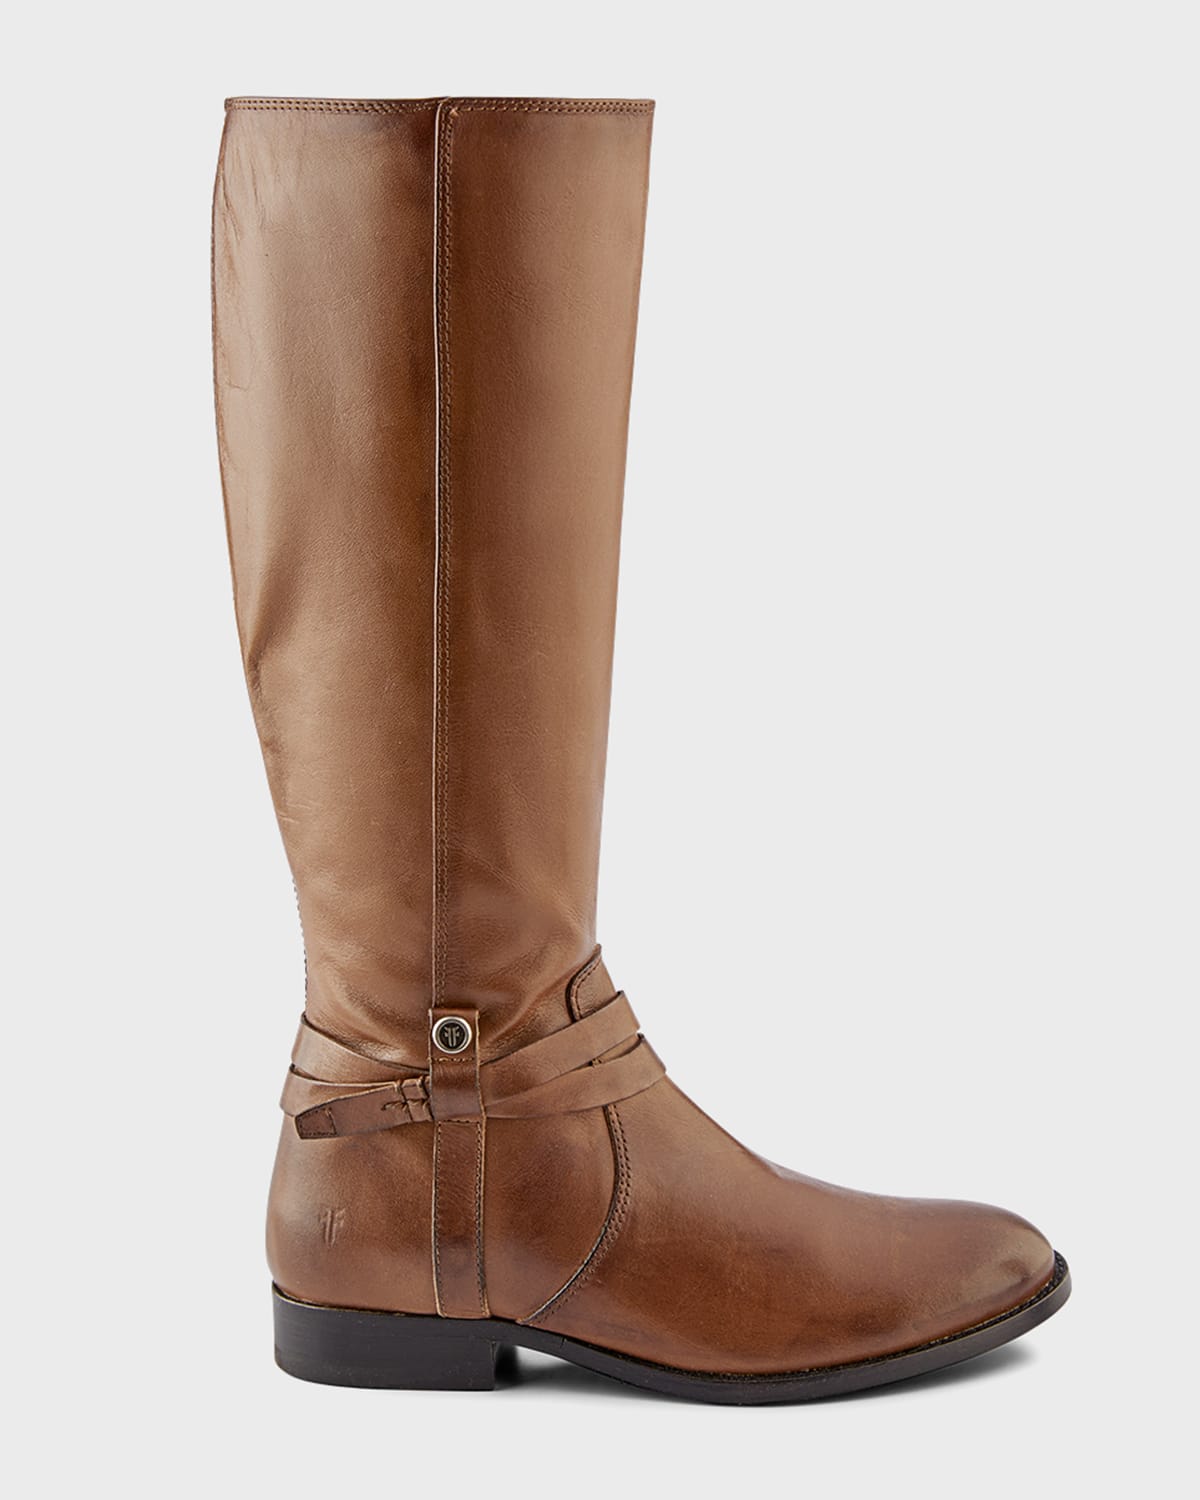 Melissa Leather Belted Tall Riding Boots